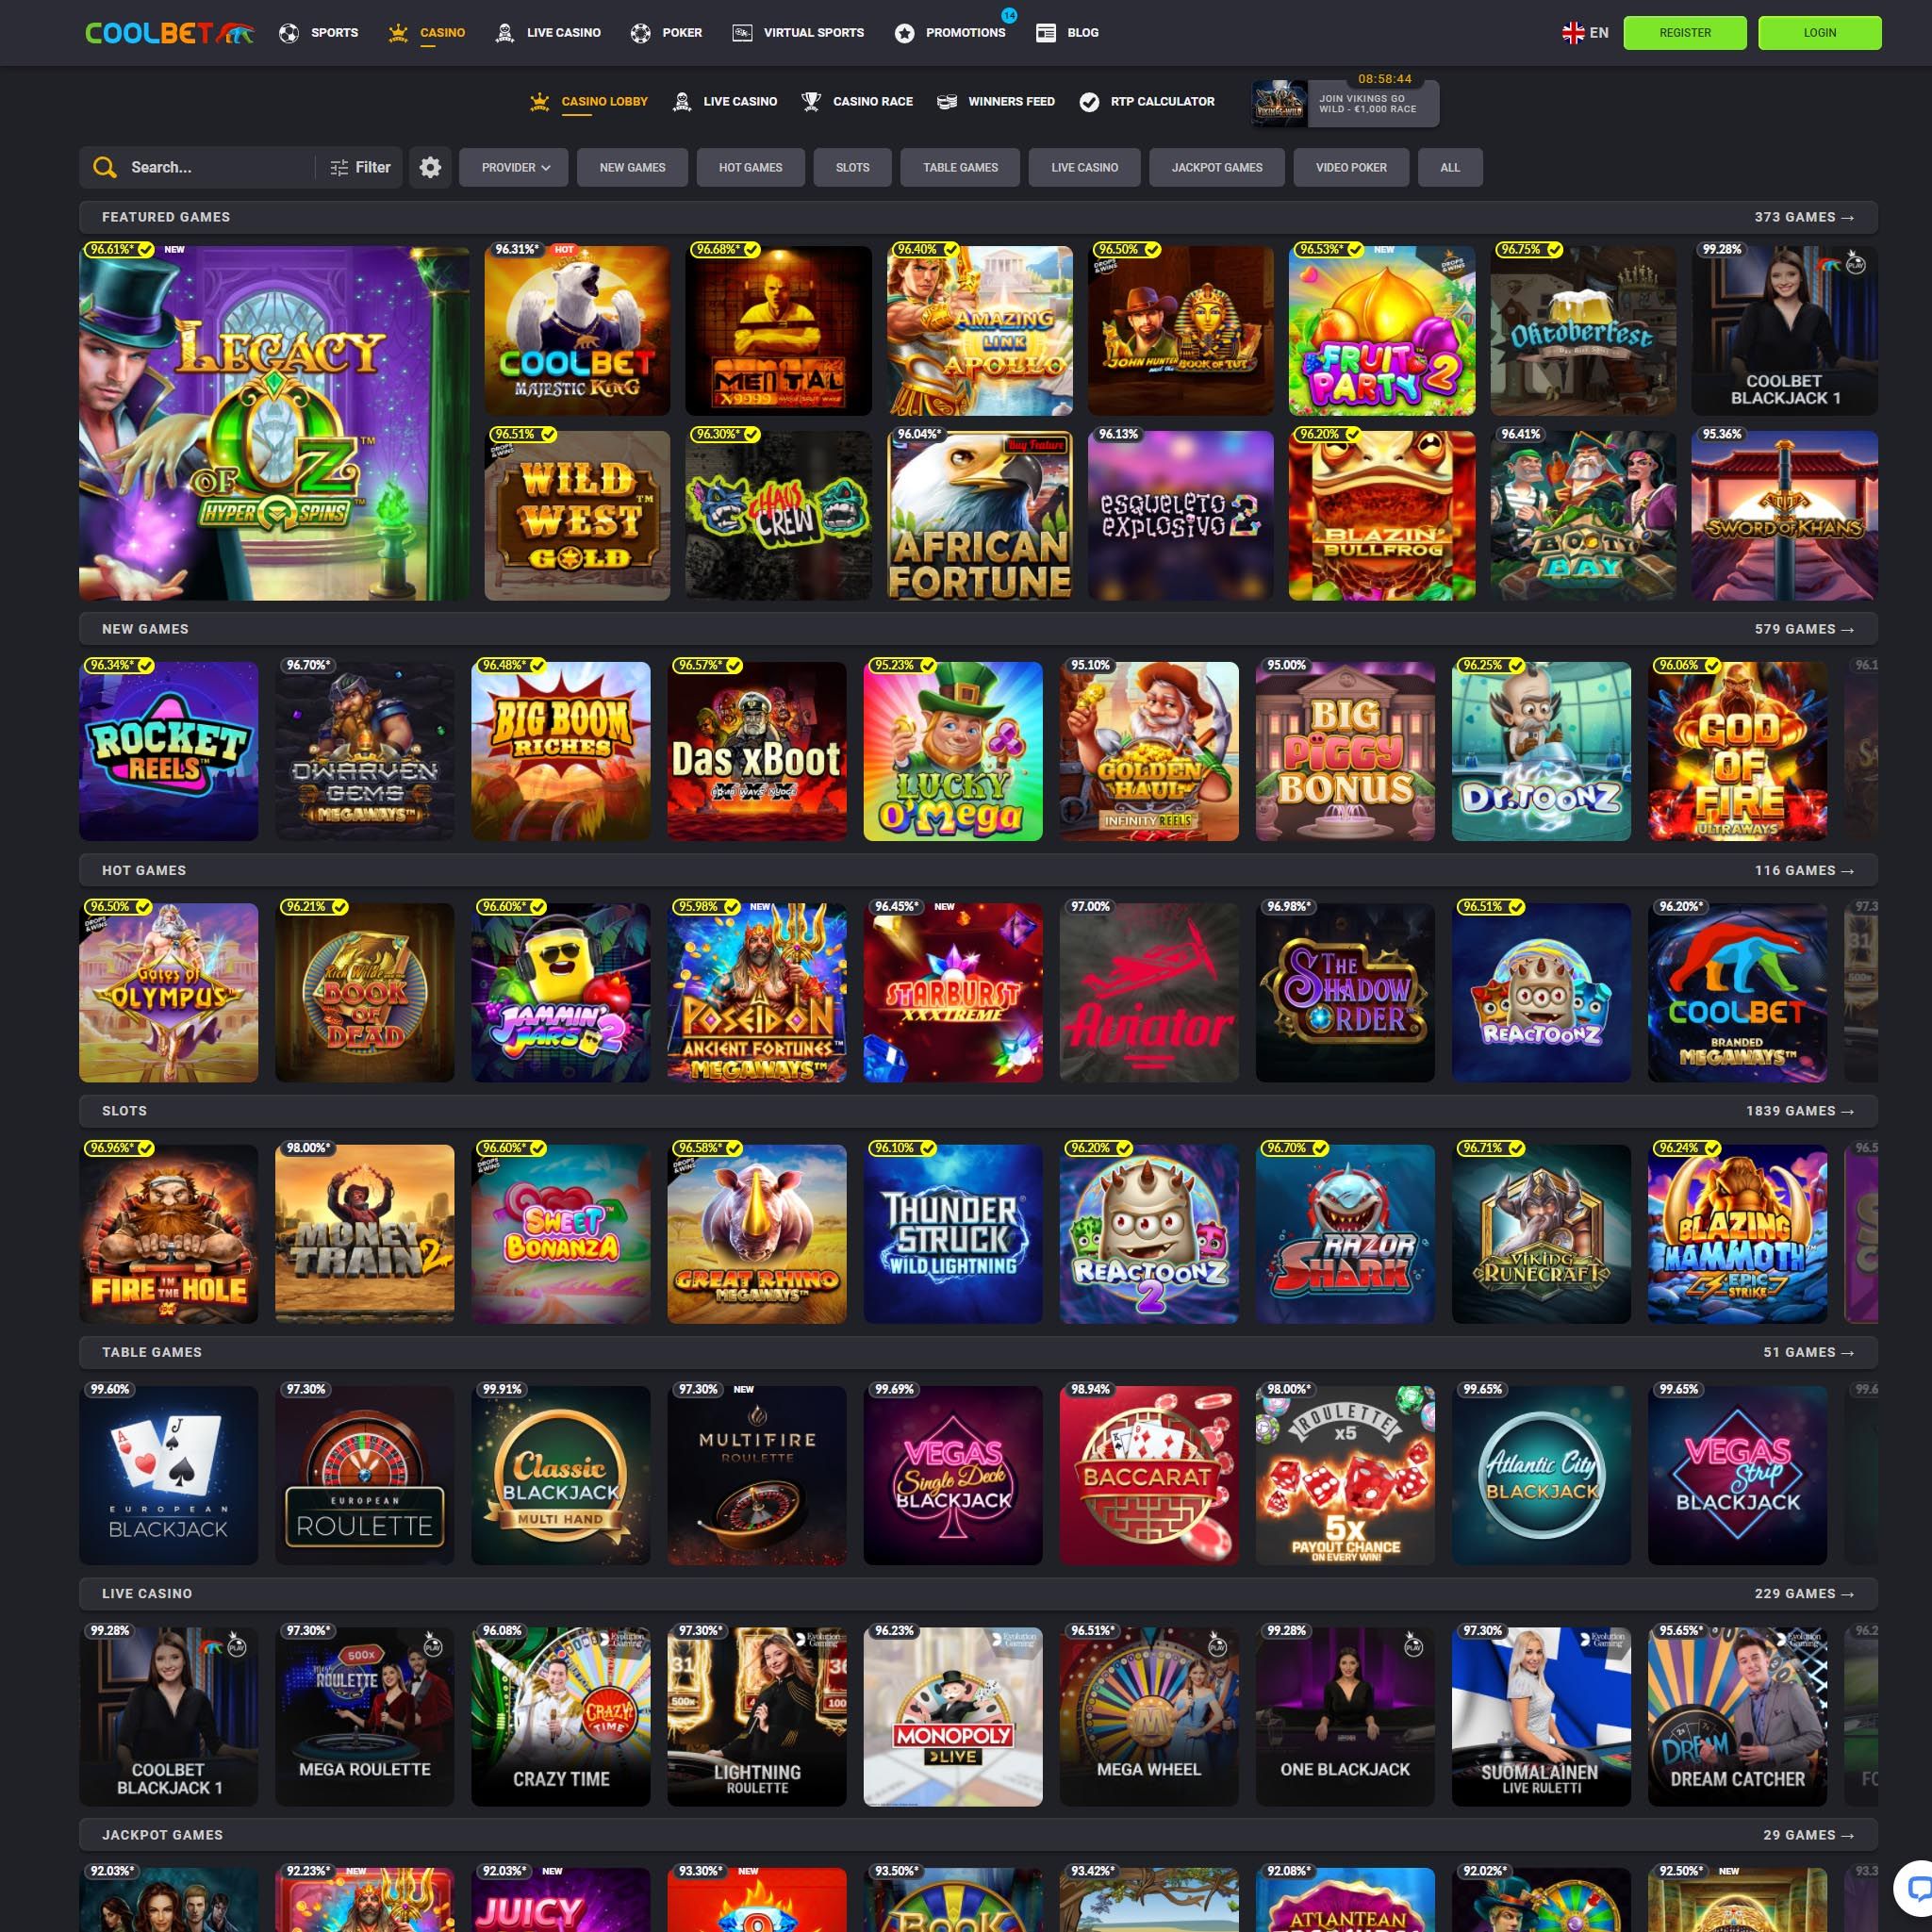 Coolbet full games catalogue